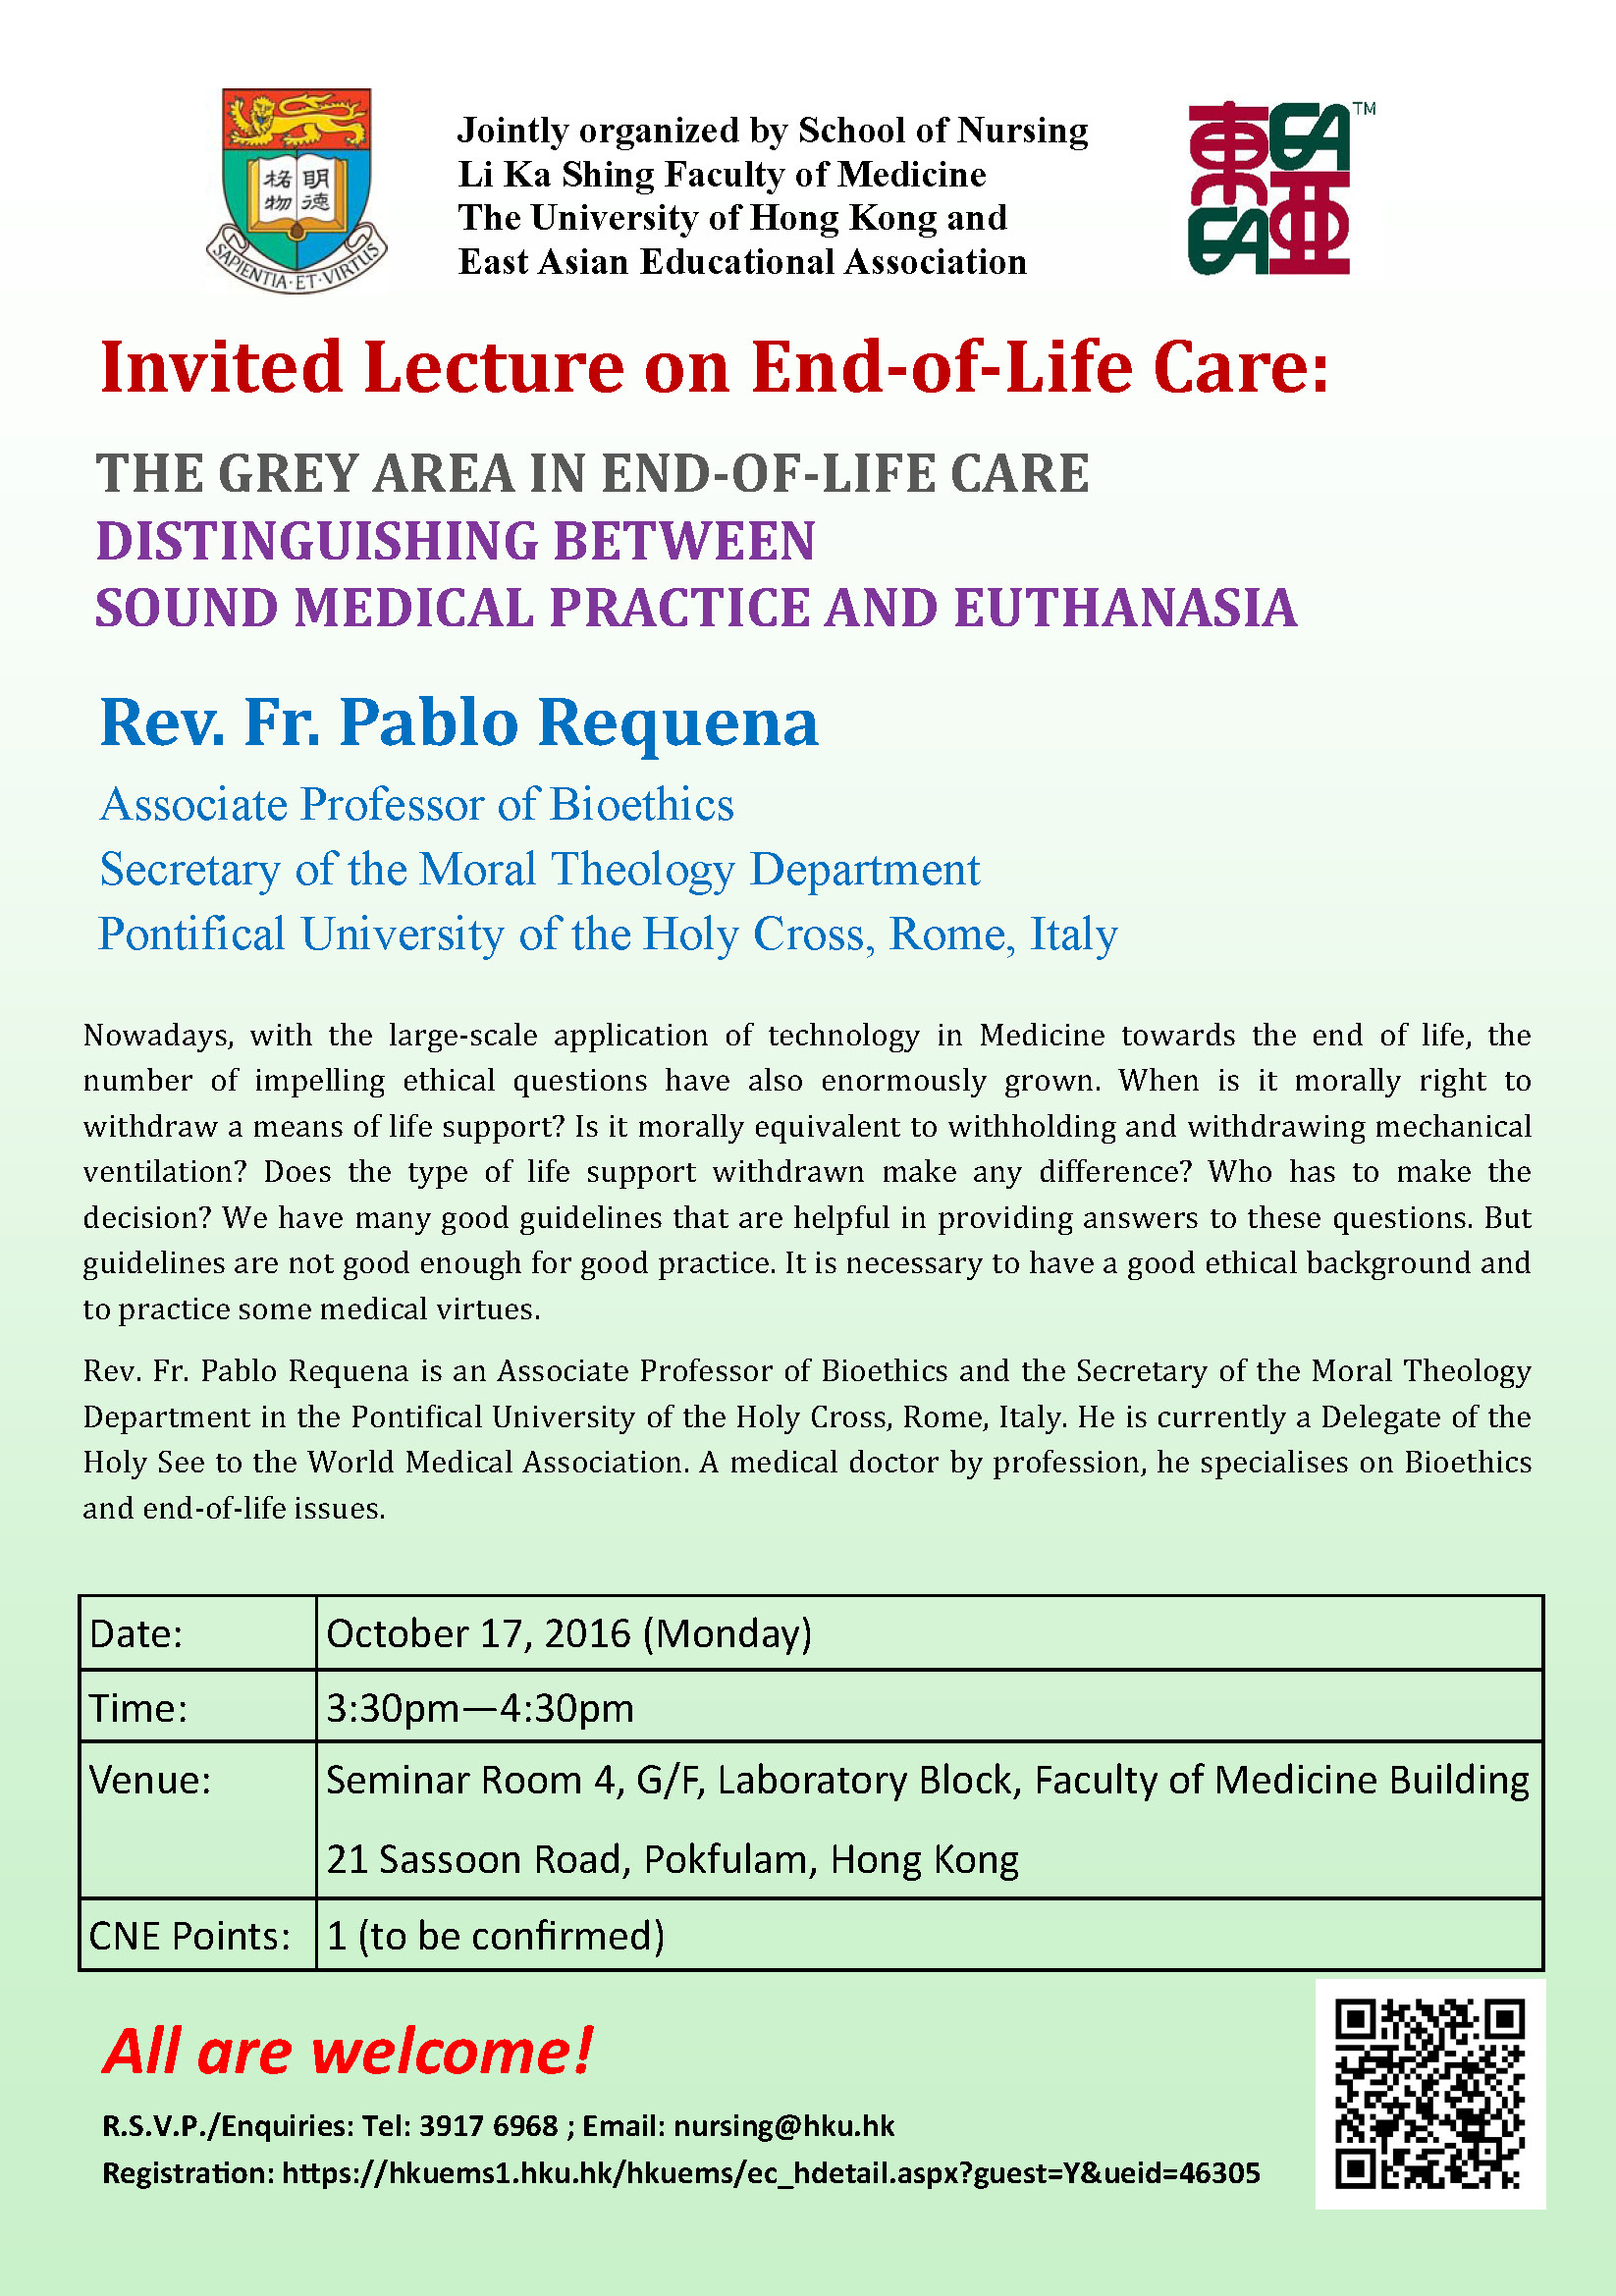 Invited Lecture on End-of-Life Care jointly organized by the School of Nursing, HKU and East Asian Educational Association  